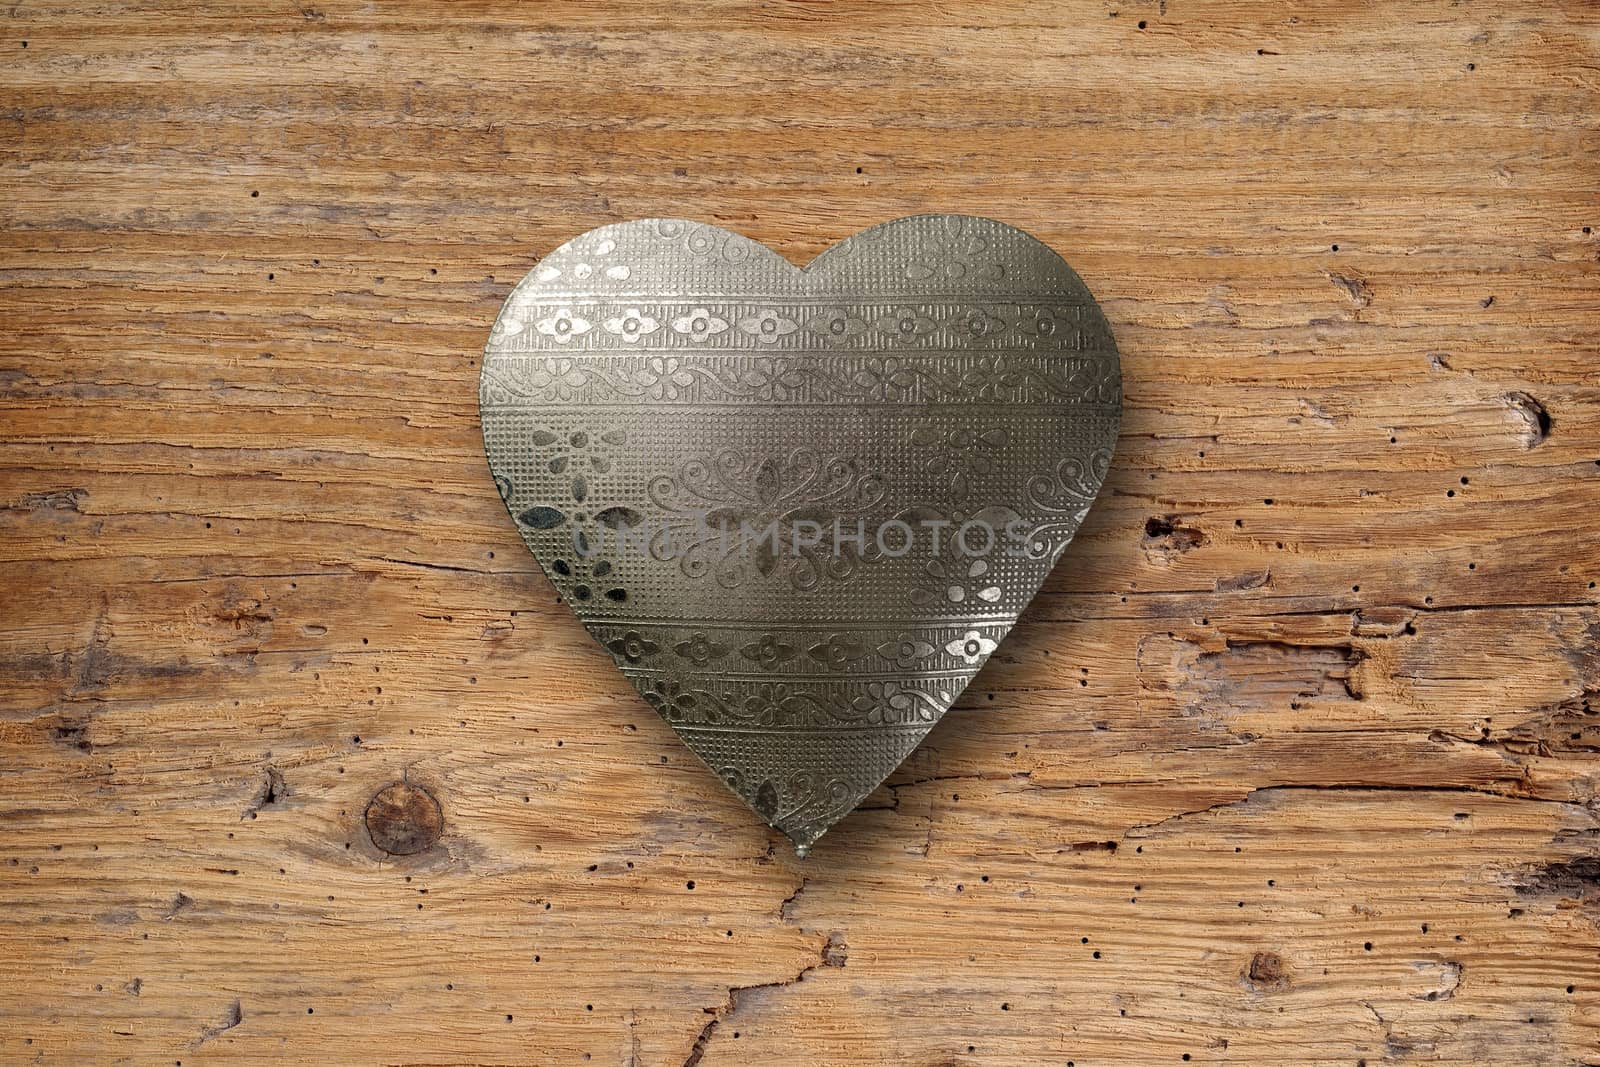 Photo of an ornate metal heart on top of an old plank of wood.
